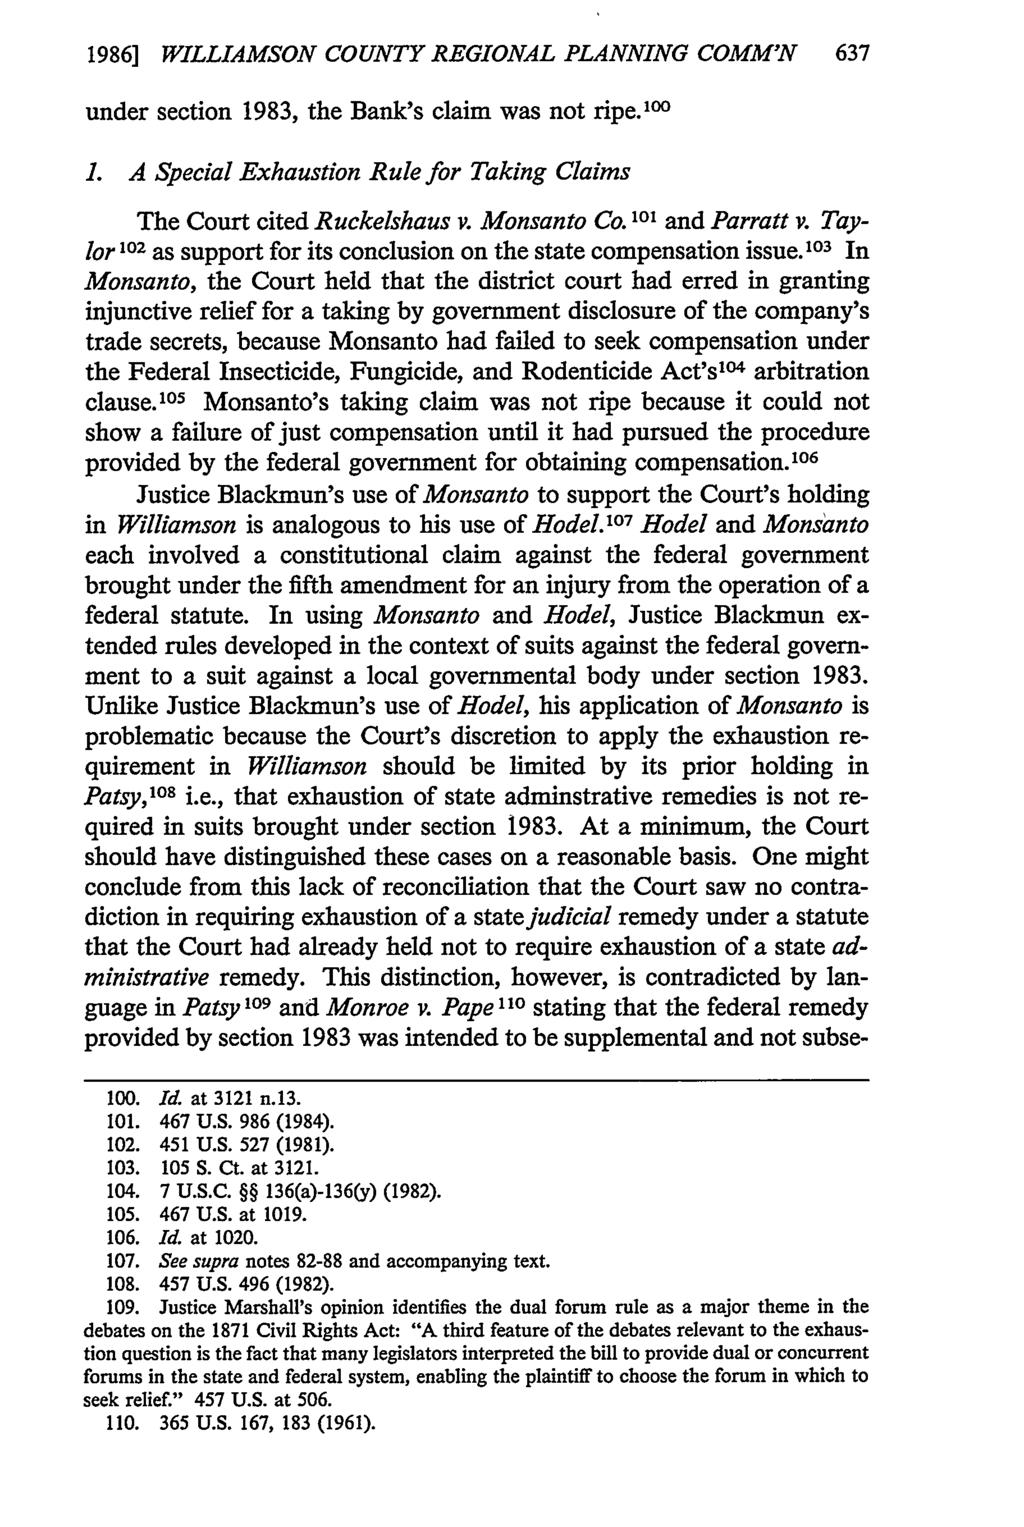 1986] WILLIAMSON COUNTY REGIONAL PLANNING COMM'N 637 under section 1983, the Bank's claim was not ripe. 00 1. A Special Exhaustion Rule for Taking Claims The Court cited Ruckelshaus v. Monsanto Co.